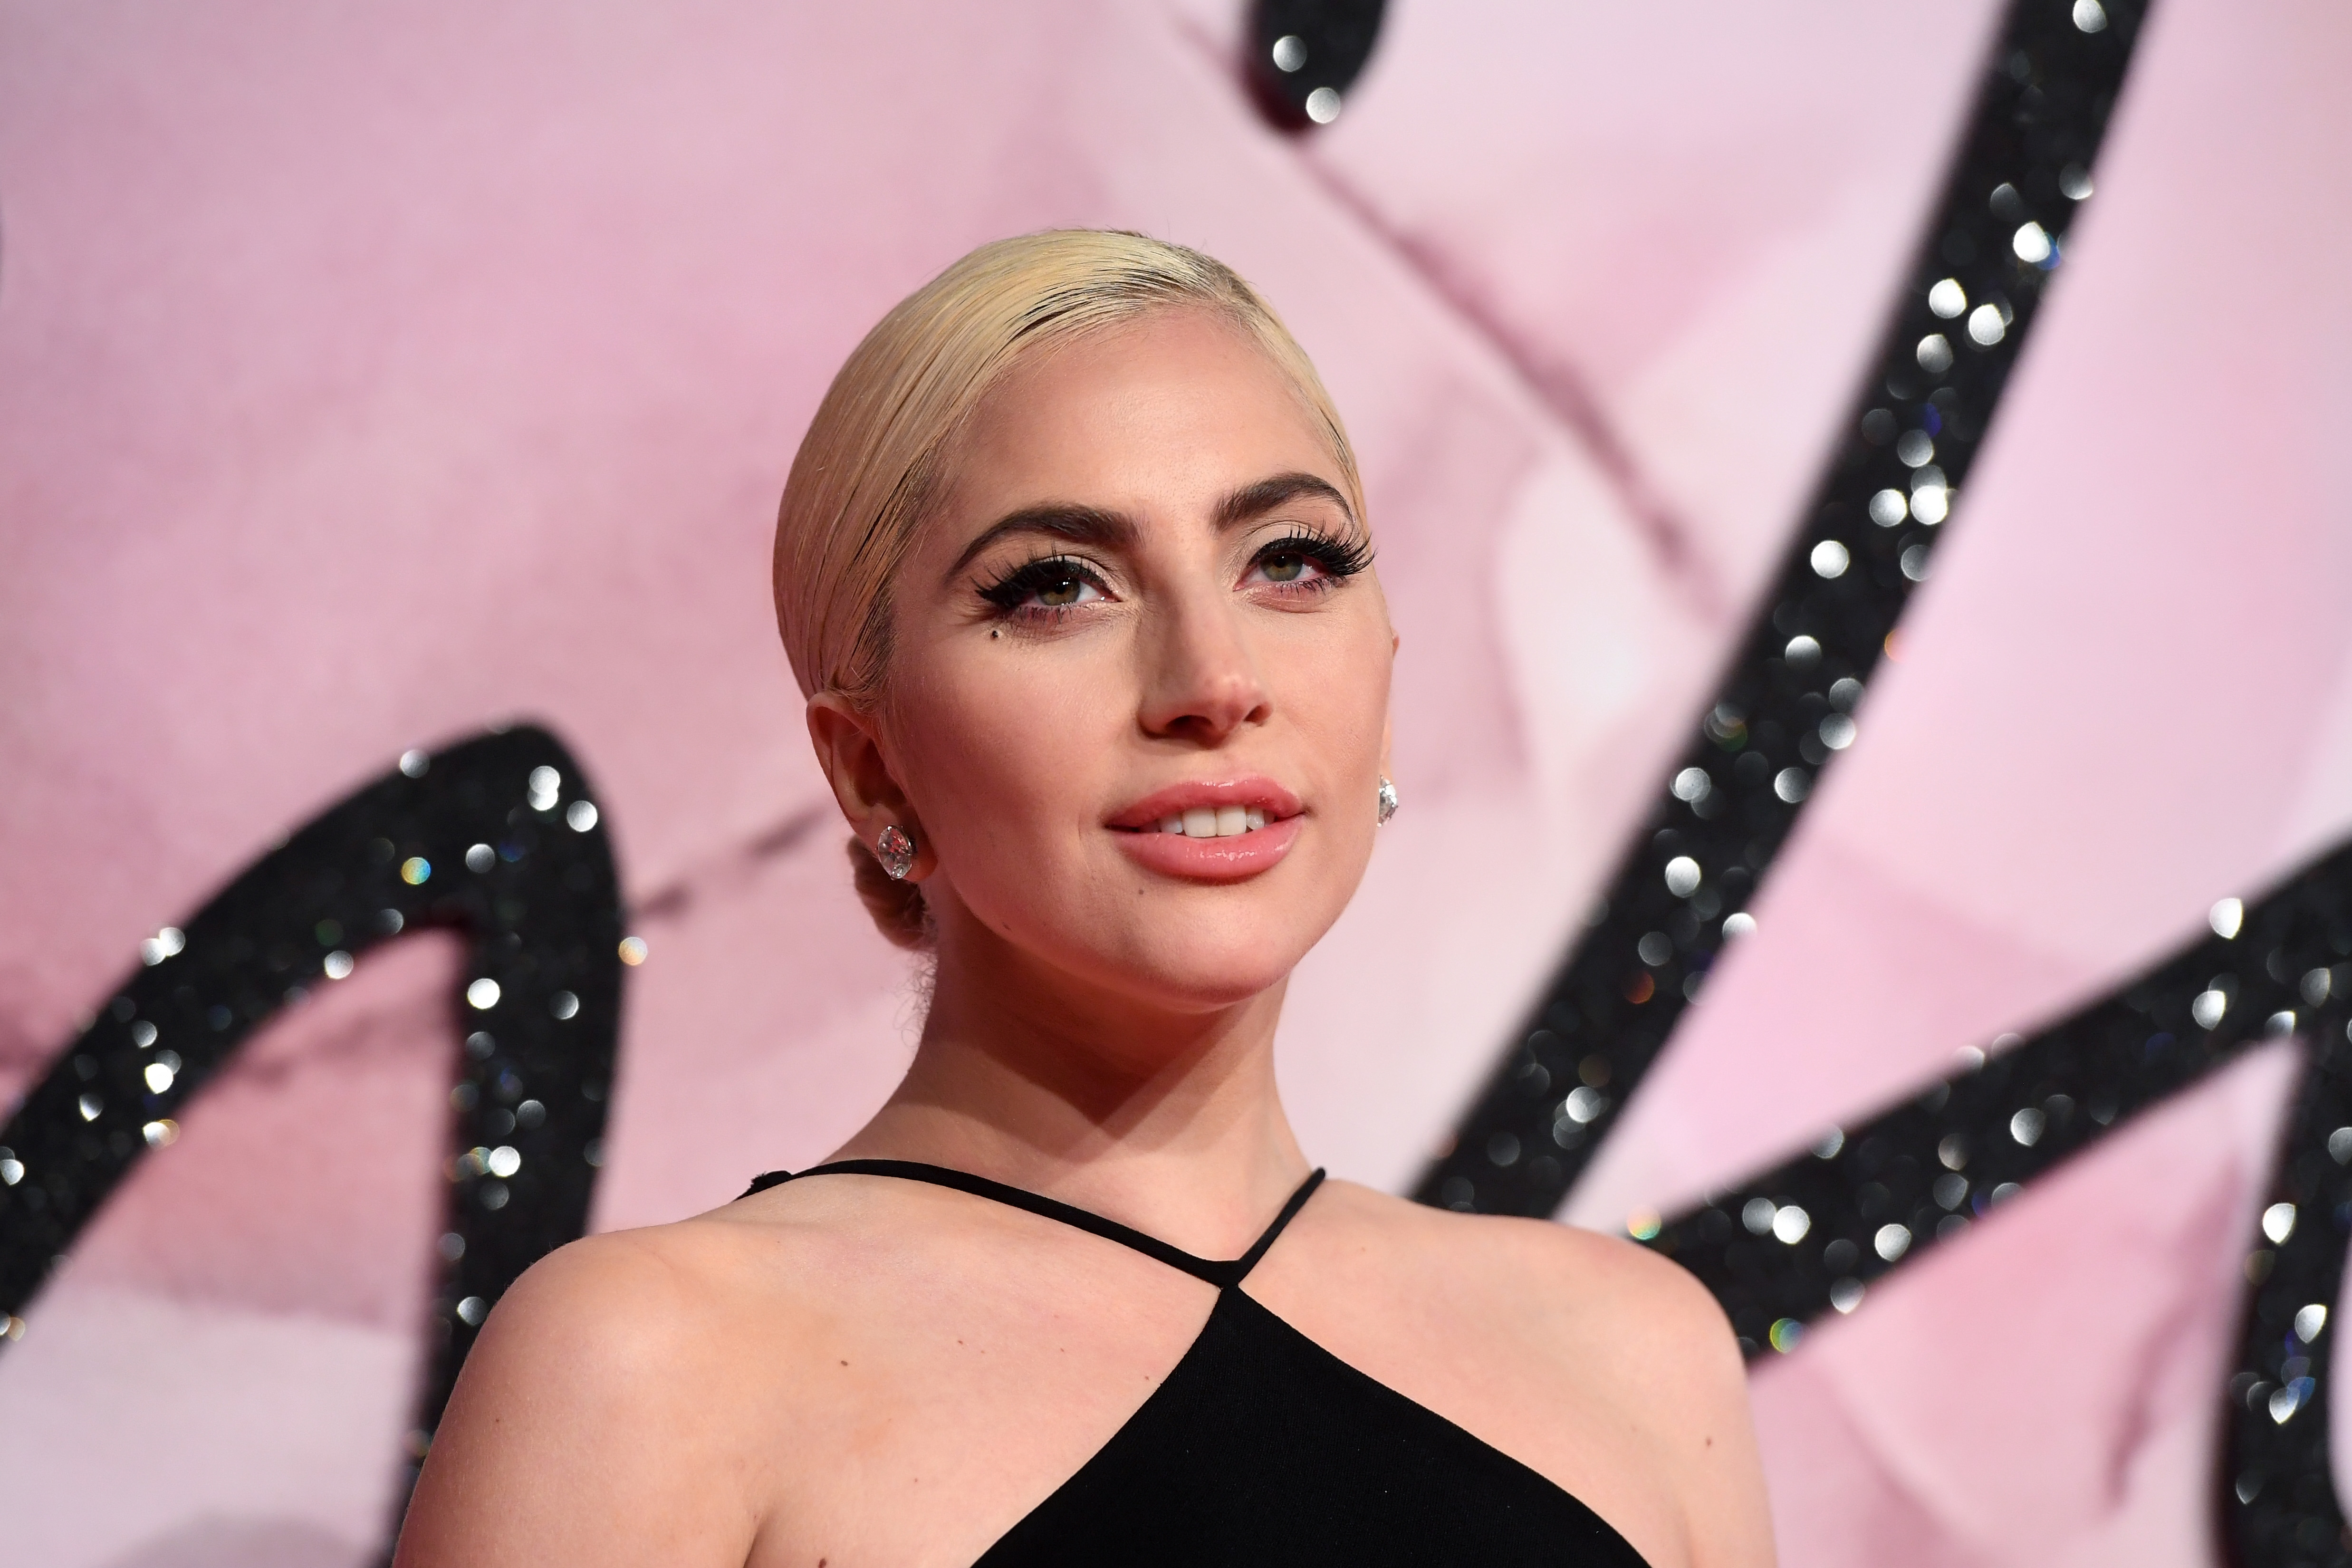 Lady Gaga Strips Nude For Technological Photo